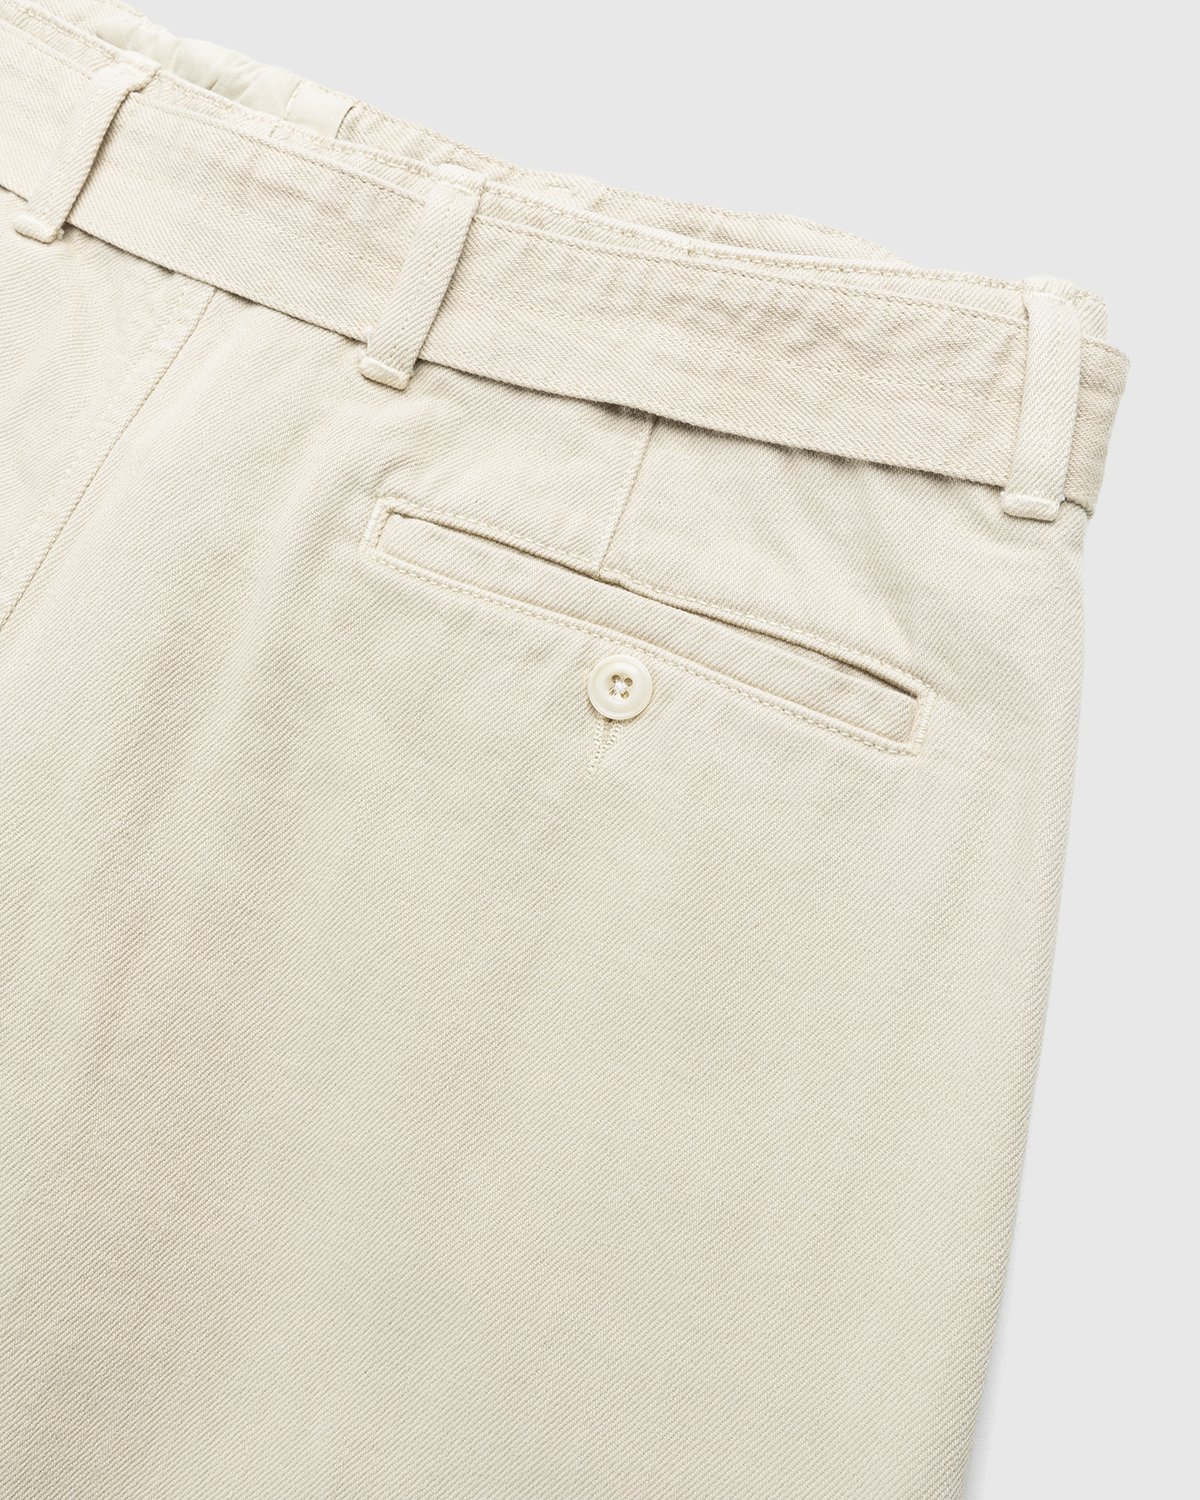 Lemaire - Rinsed Denim Twisted Pants Saltpeter - Clothing - Beige - Image 3